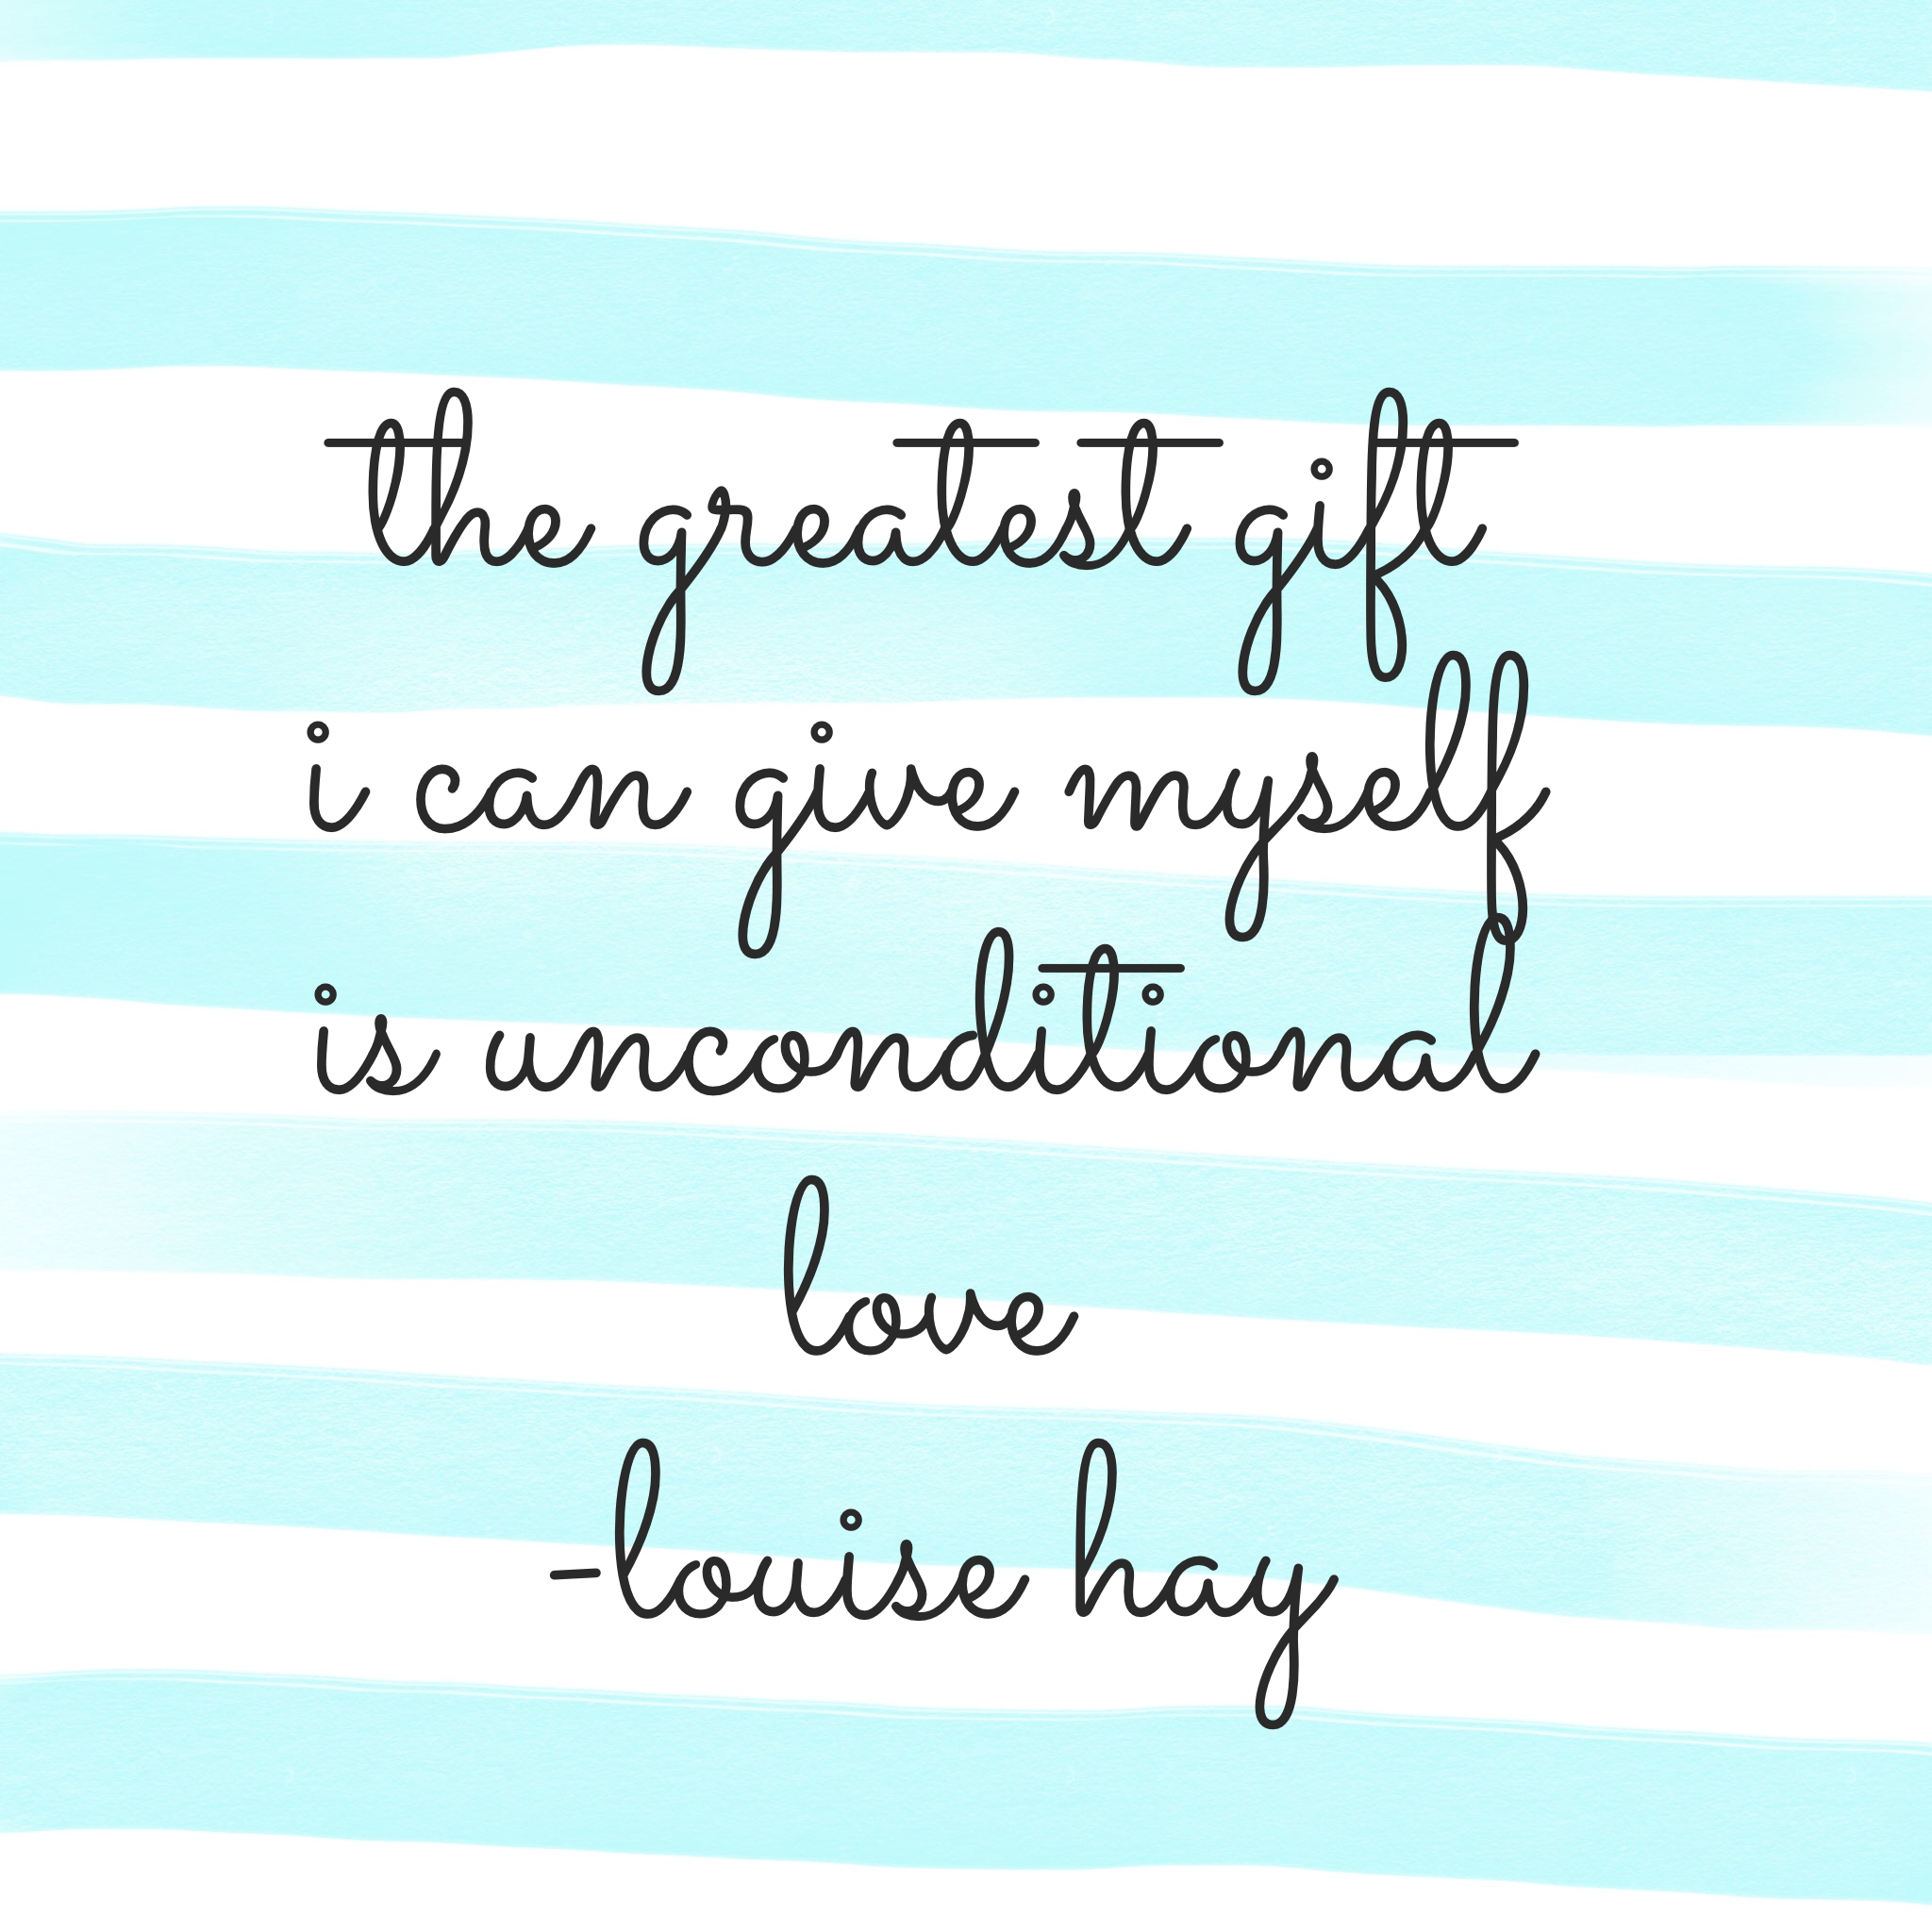 Do Daily Affirmations Really Work? Thoughts featured by top US Over 50 lifestyle blog, Sharing A Journey: image of Favorite Affirmation Unconditional Love Quote by Louise Hay